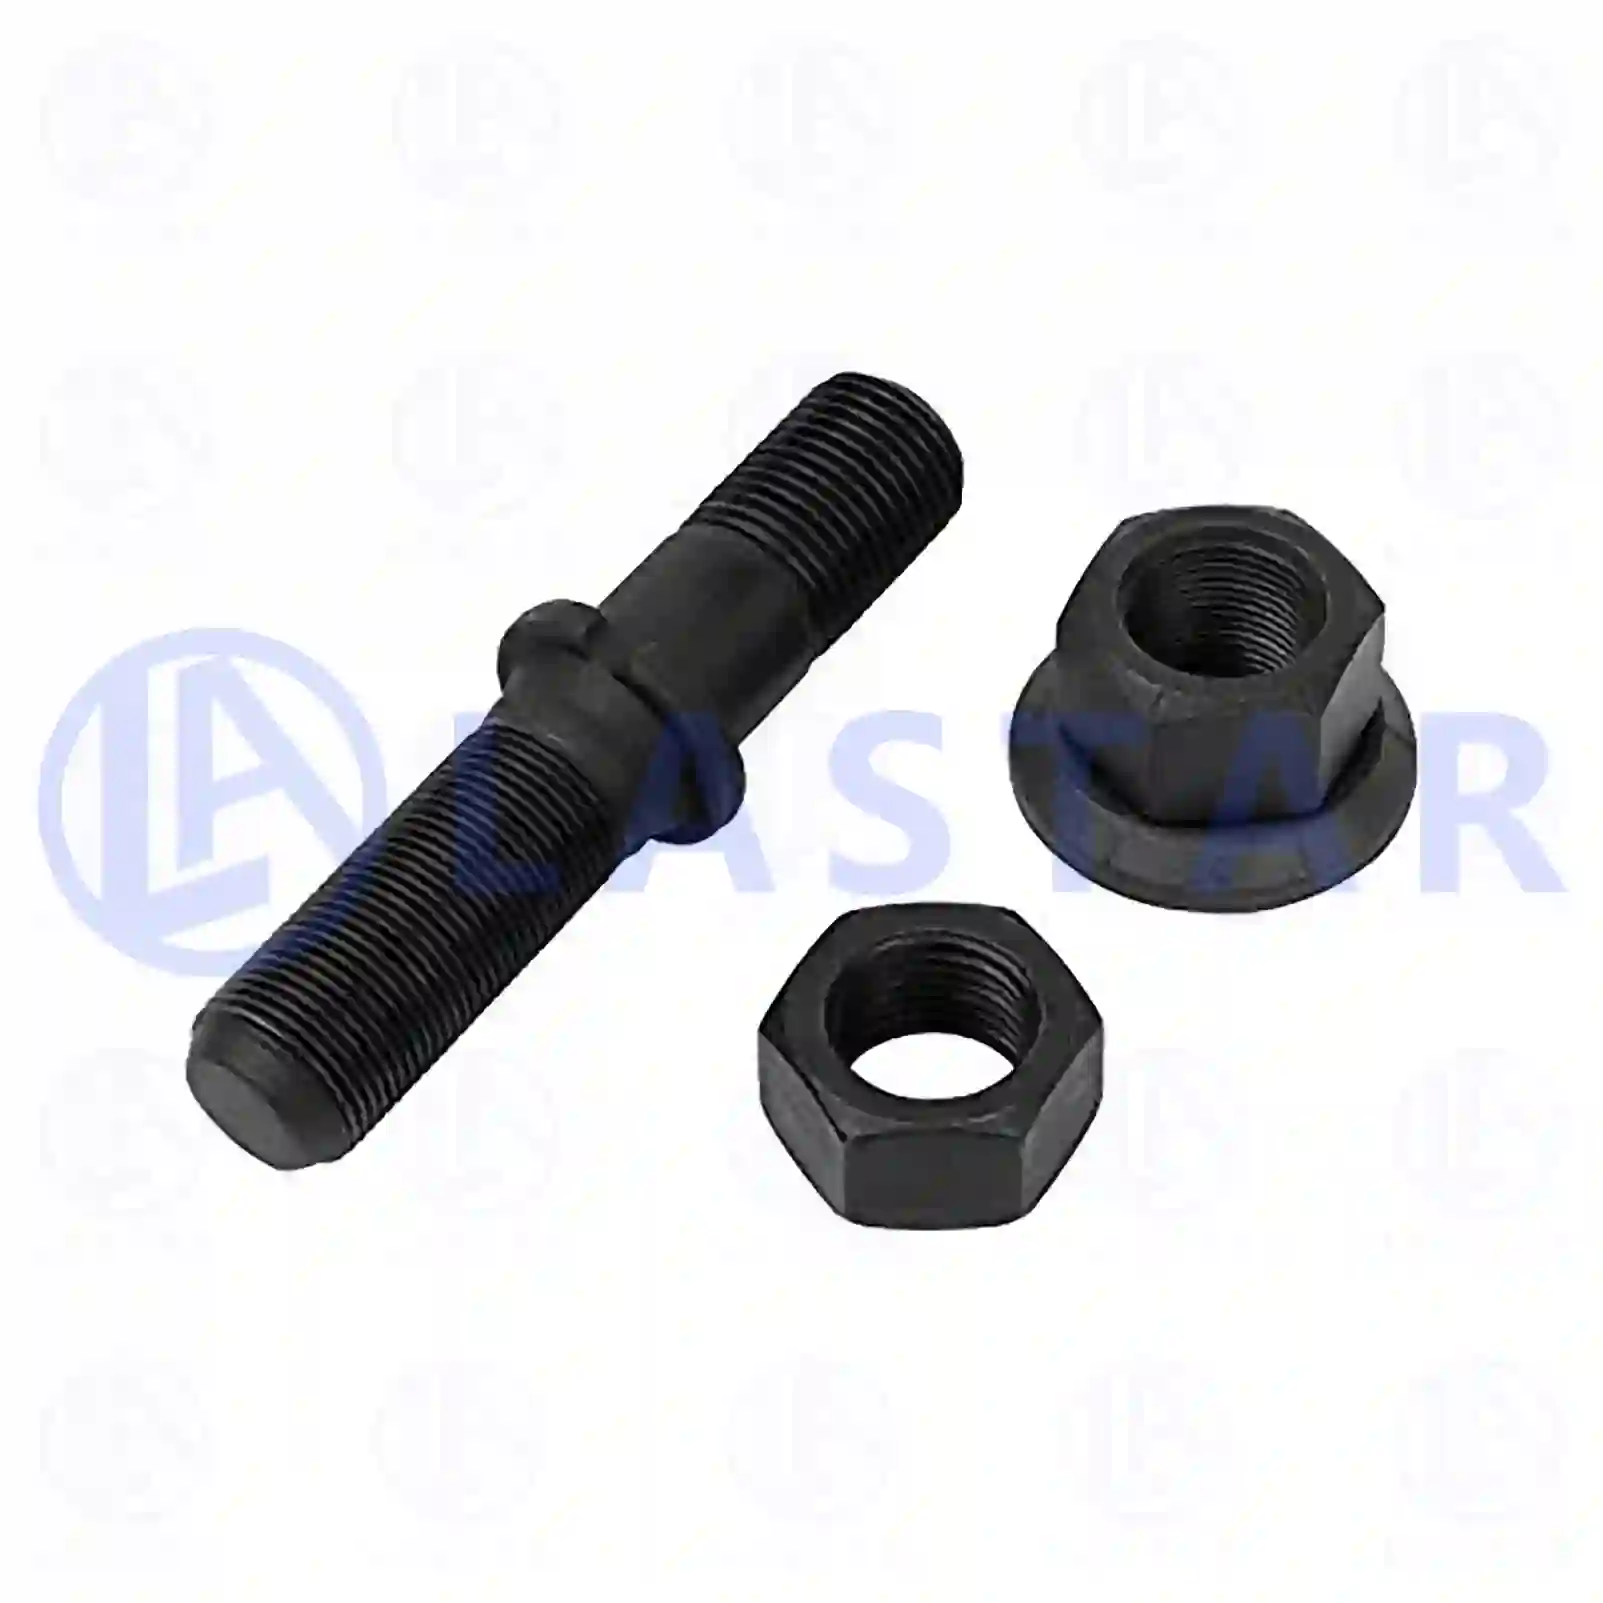 Wheel bolt, complete, 77726441, 0580623220, 0980623220, 0980623410, 185118, , , , , ||  77726441 Lastar Spare Part | Truck Spare Parts, Auotomotive Spare Parts Wheel bolt, complete, 77726441, 0580623220, 0980623220, 0980623410, 185118, , , , , ||  77726441 Lastar Spare Part | Truck Spare Parts, Auotomotive Spare Parts